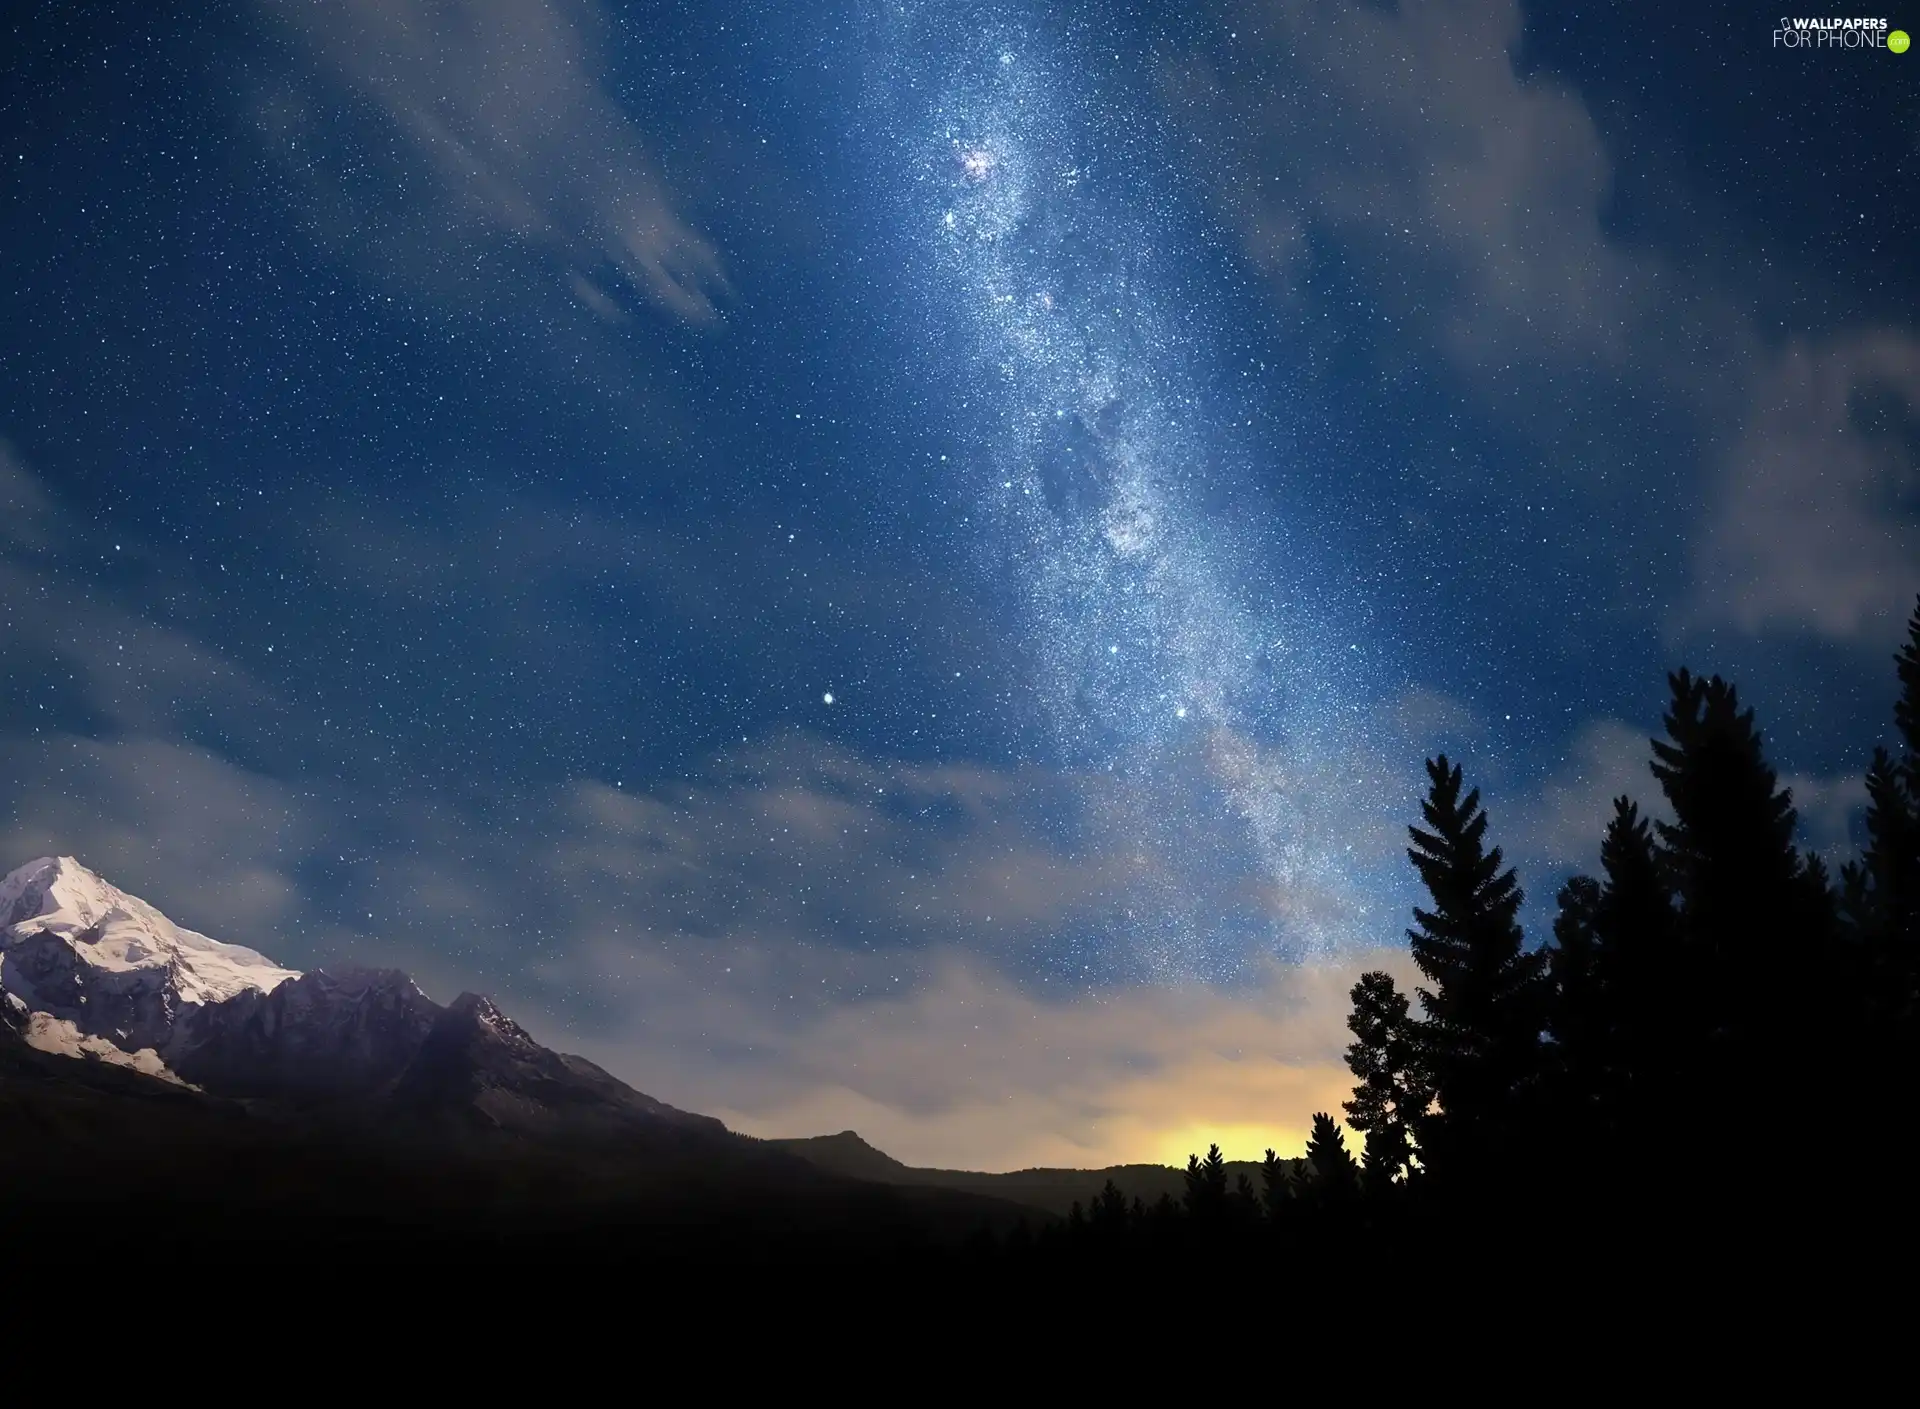 viewes, Mountains, starry, Sky, Night, trees